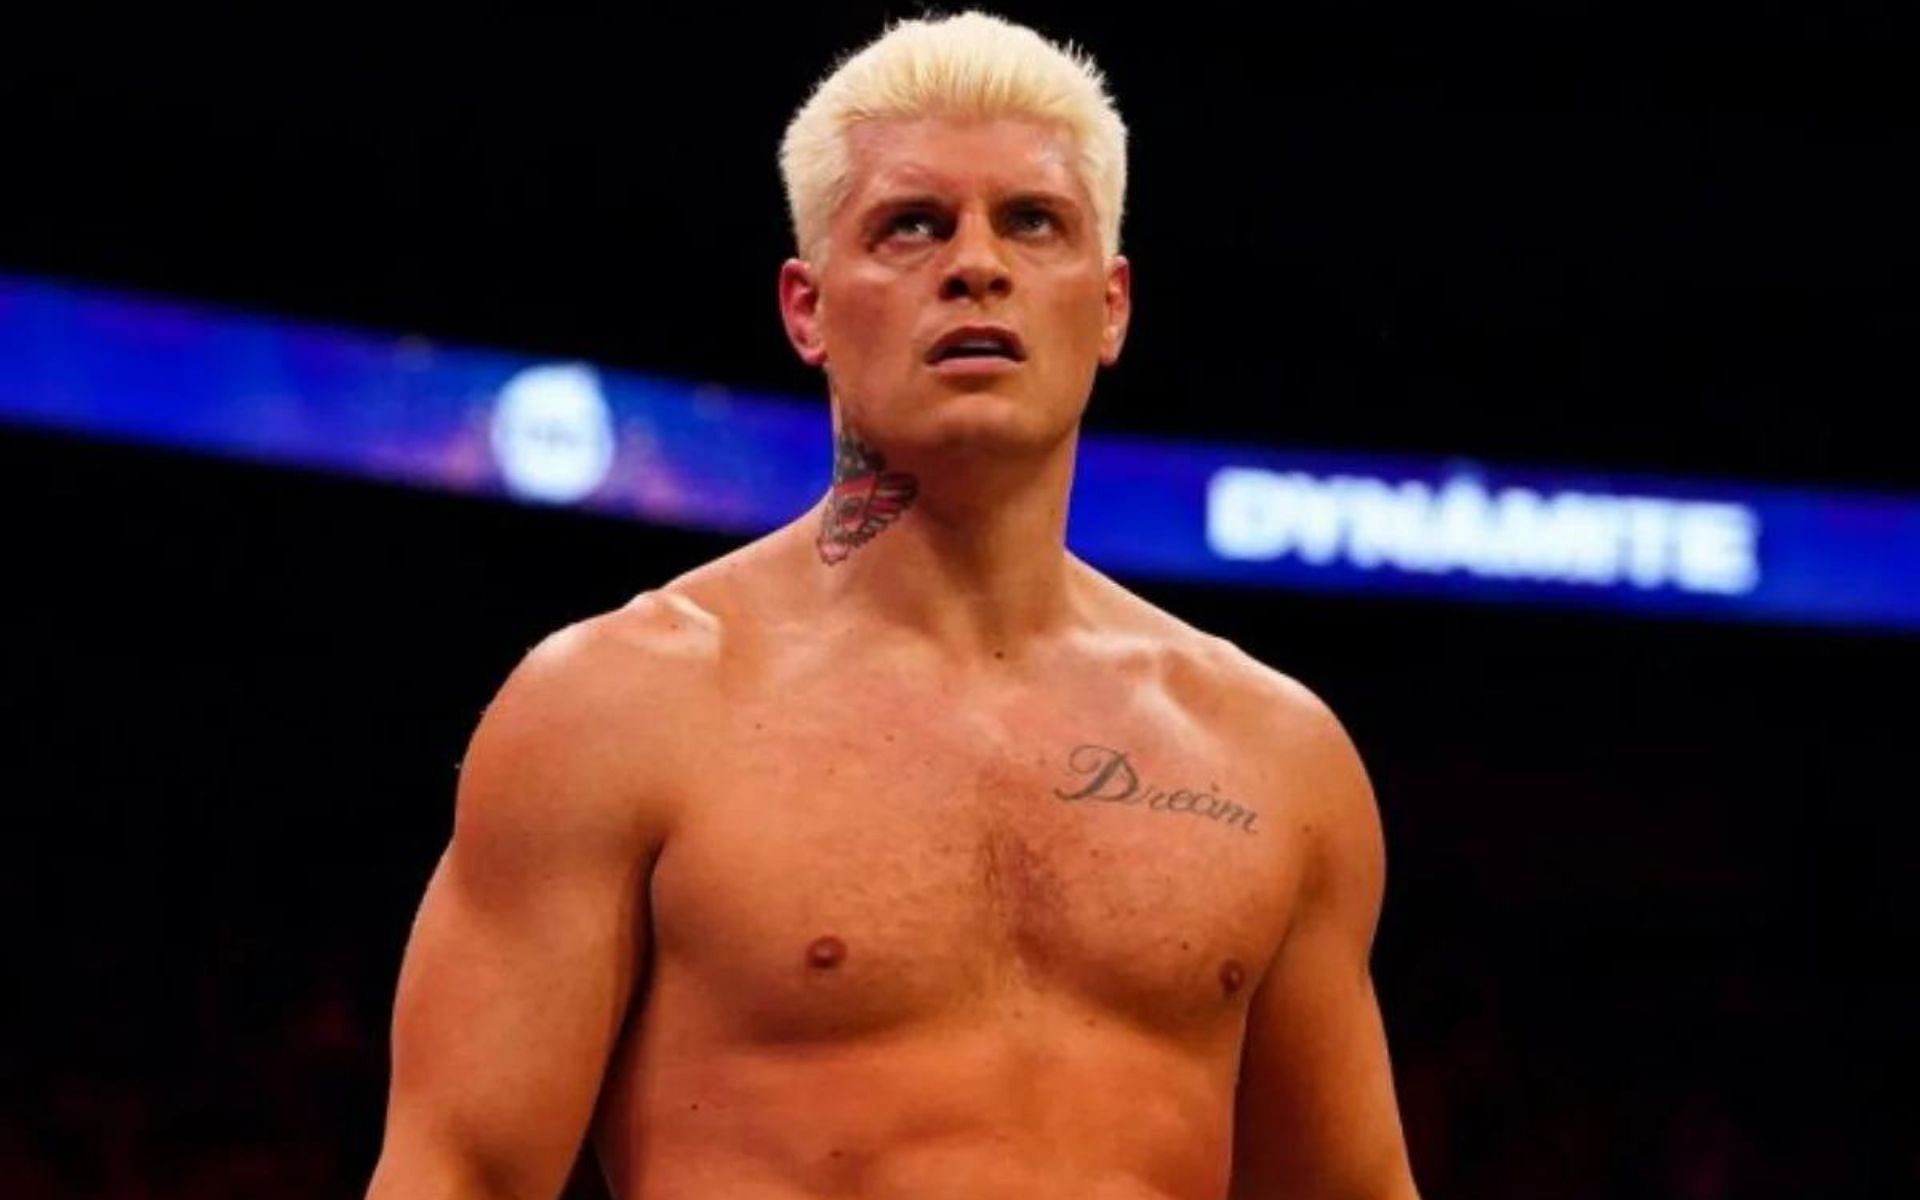 Cody Rhodes was injured prior to his bout in HIAC